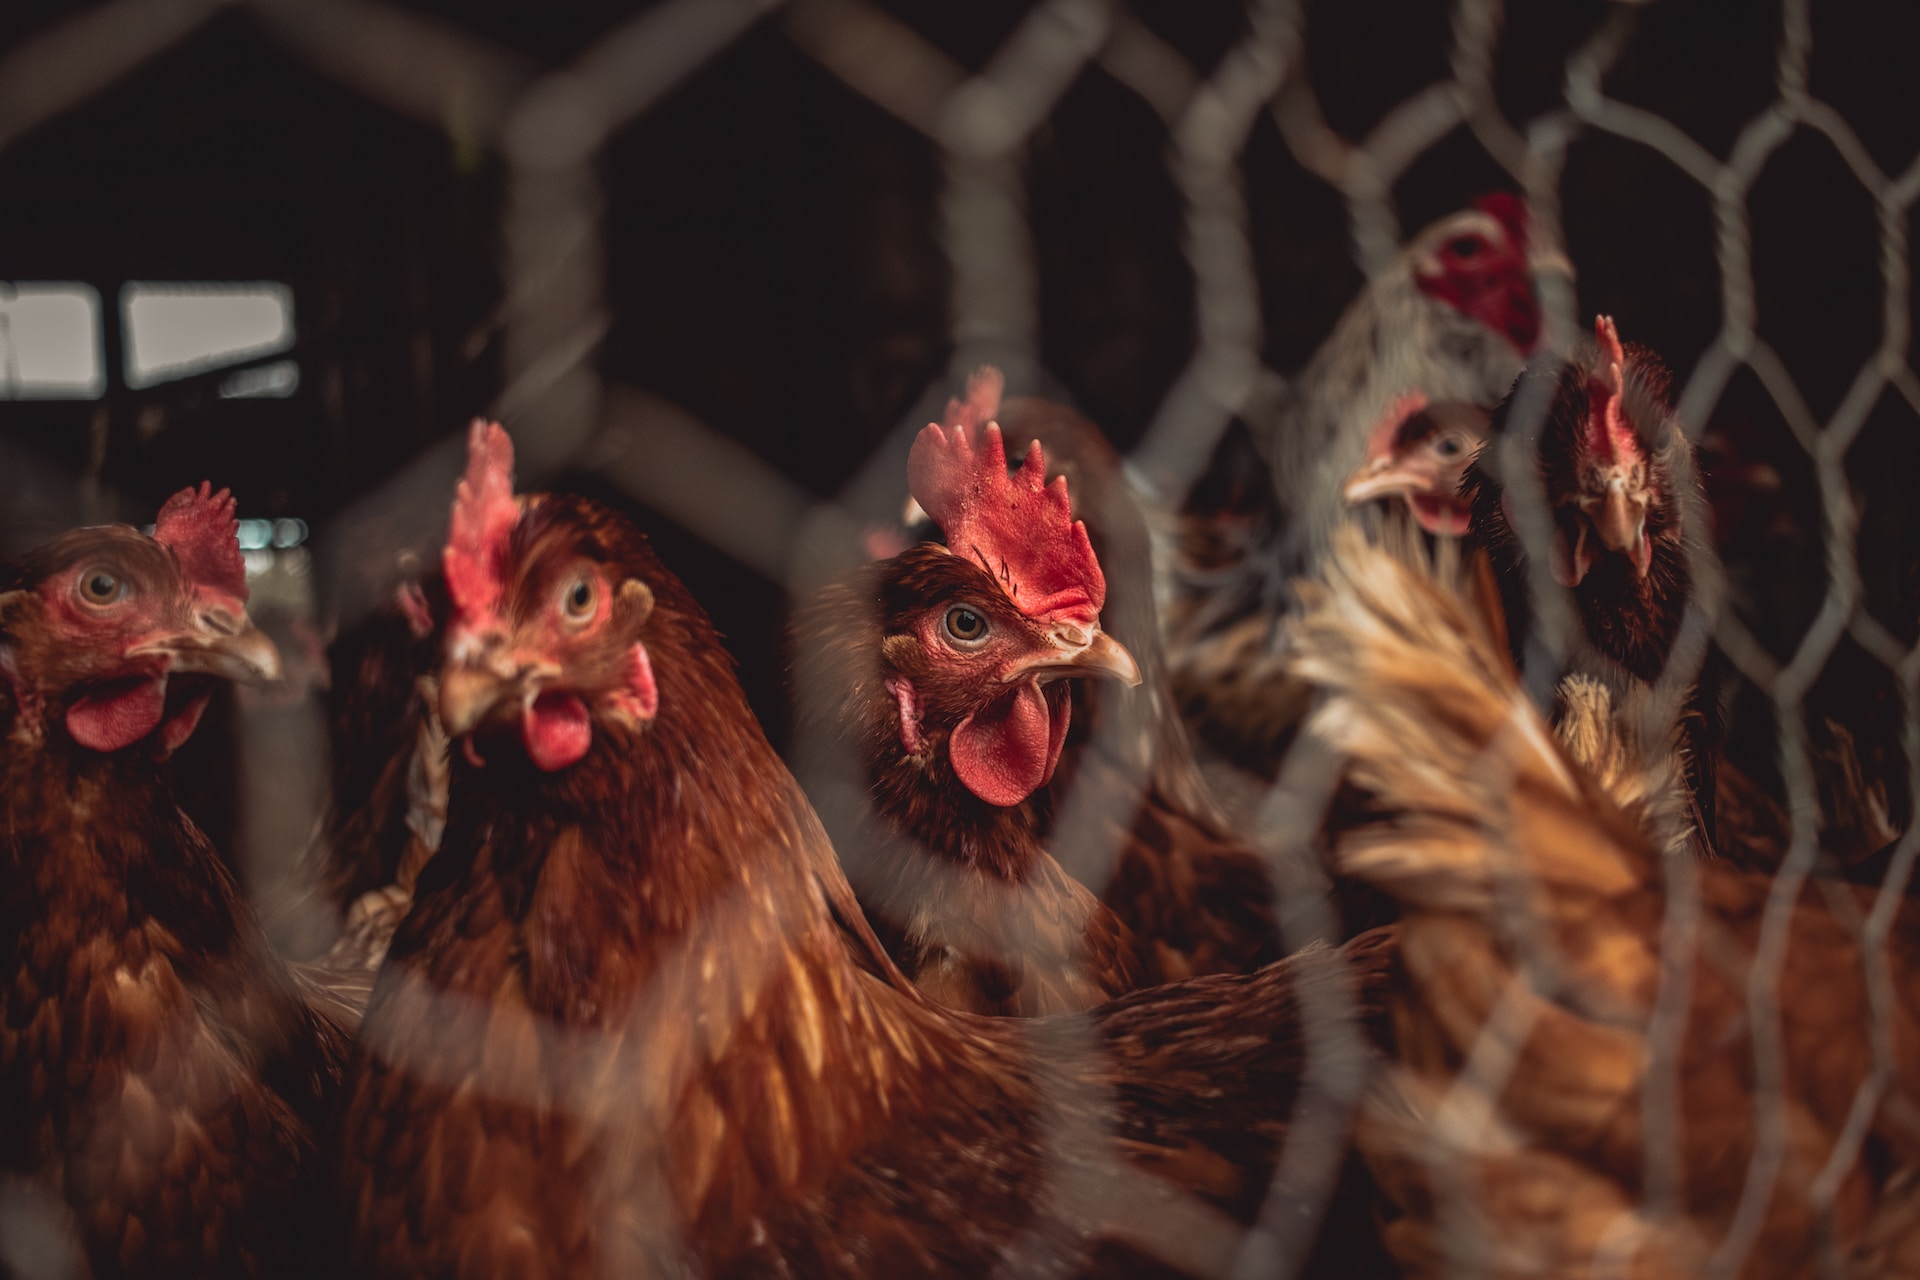 Chickens inside a cage at a poultry farm